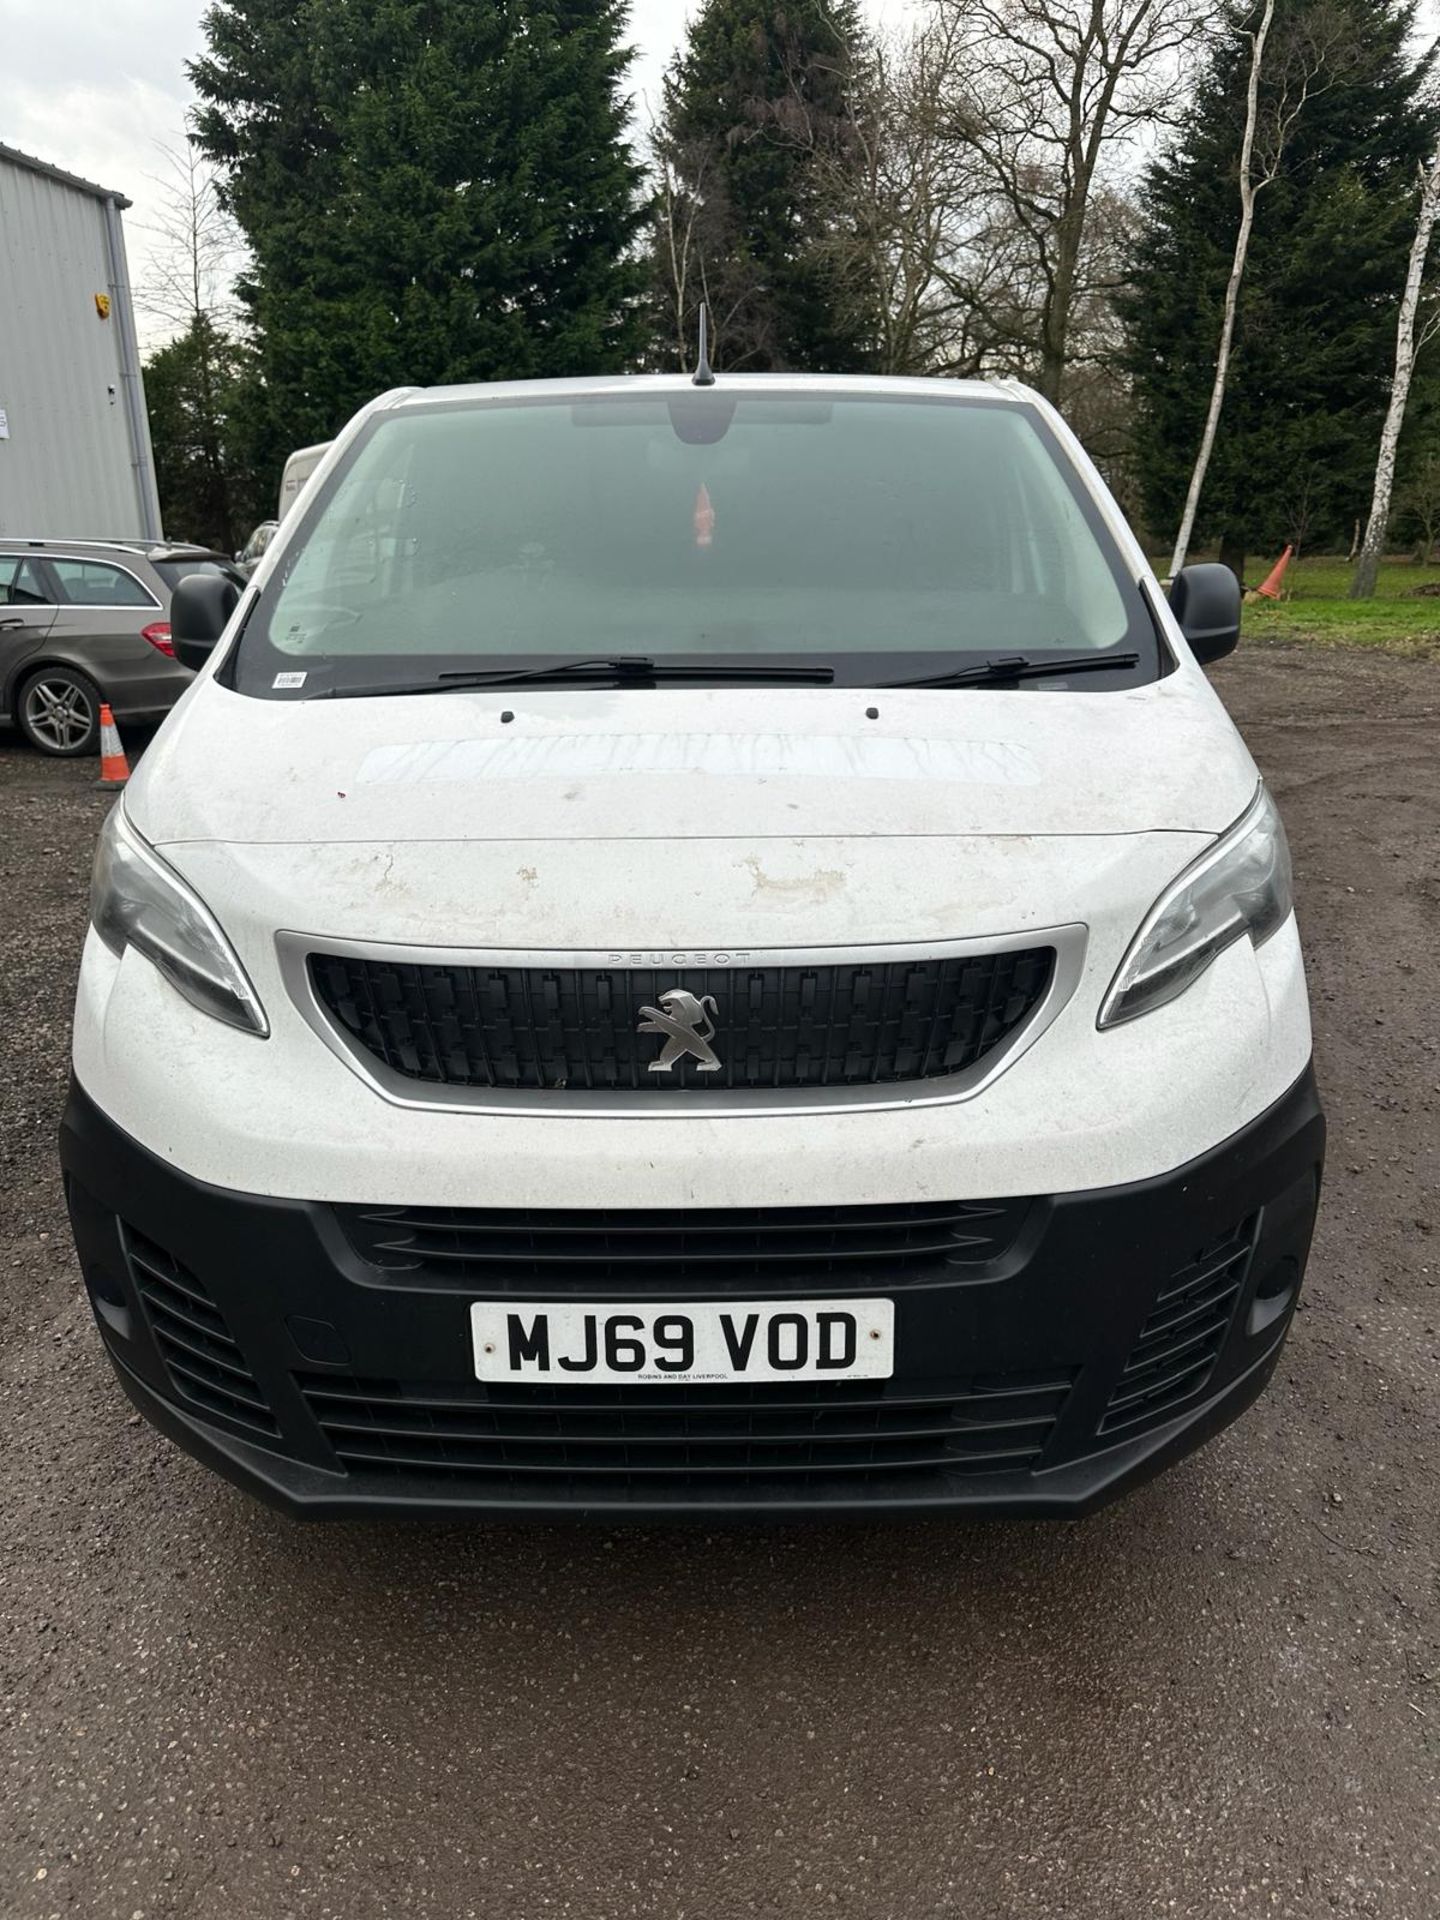 2019 69 PEUGEOT EXPERT PANEL VAN - 140K MILES - AIR CON - PLY LINED - Image 5 of 10